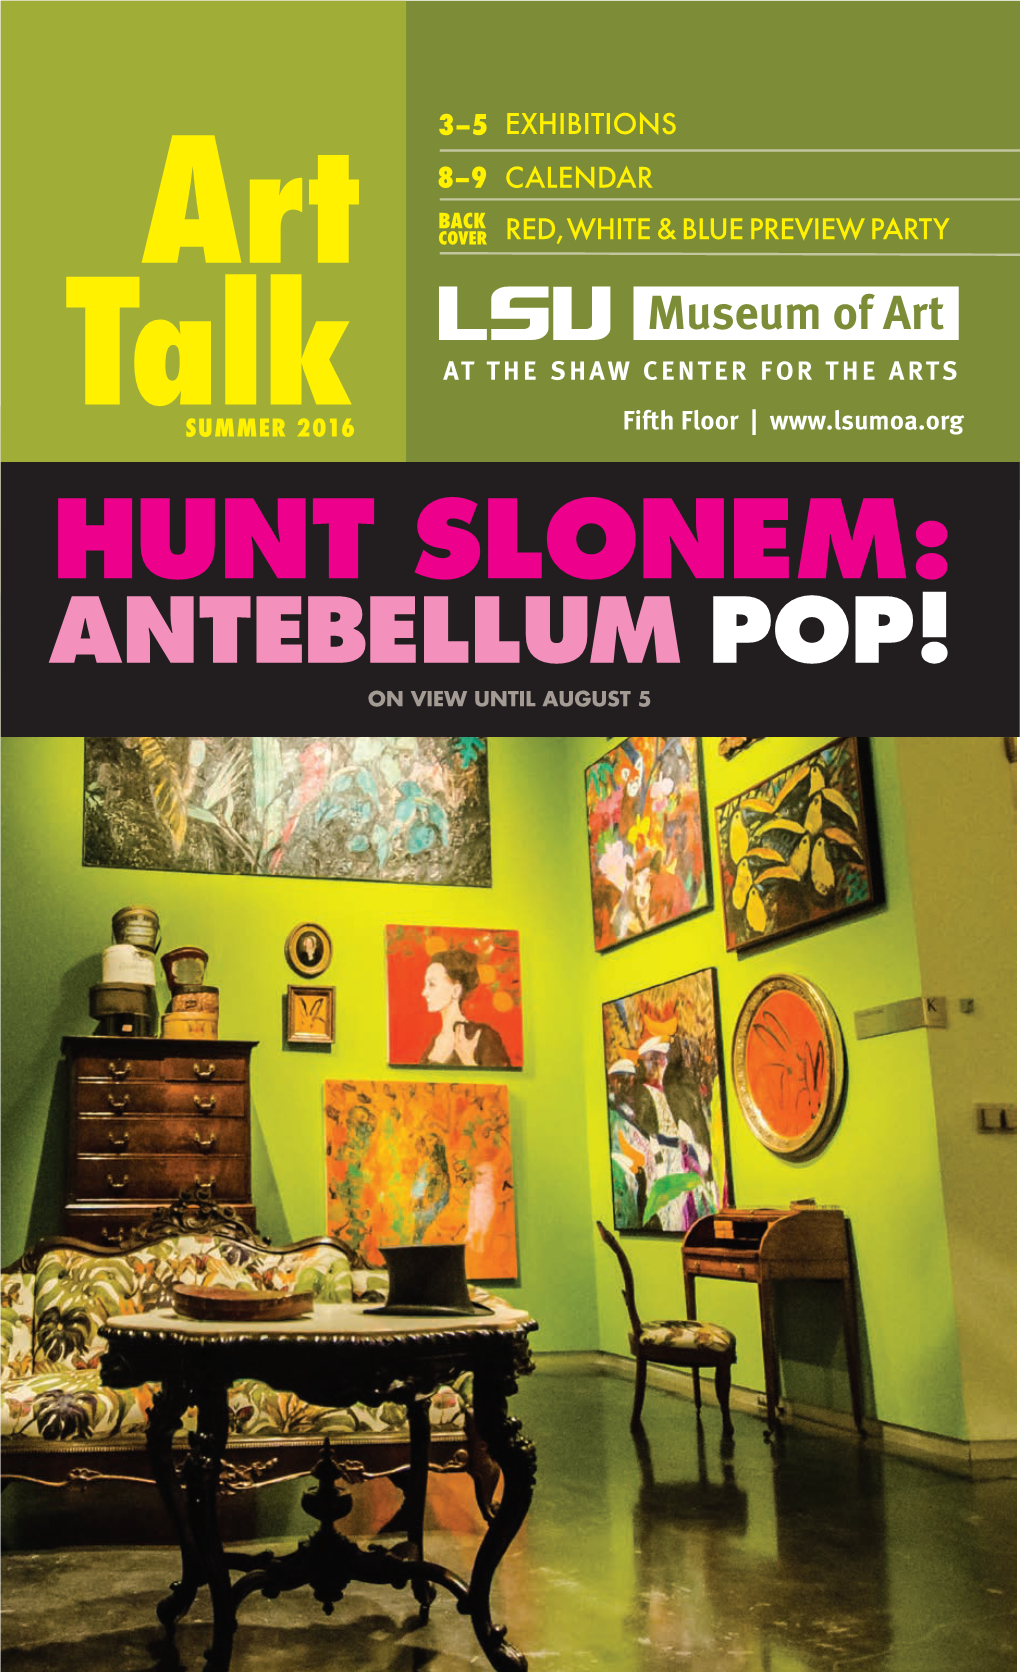 HUNT SLONEM: ANTEBELLUM POP! on VIEW UNTIL AUGUST 5 from the Director